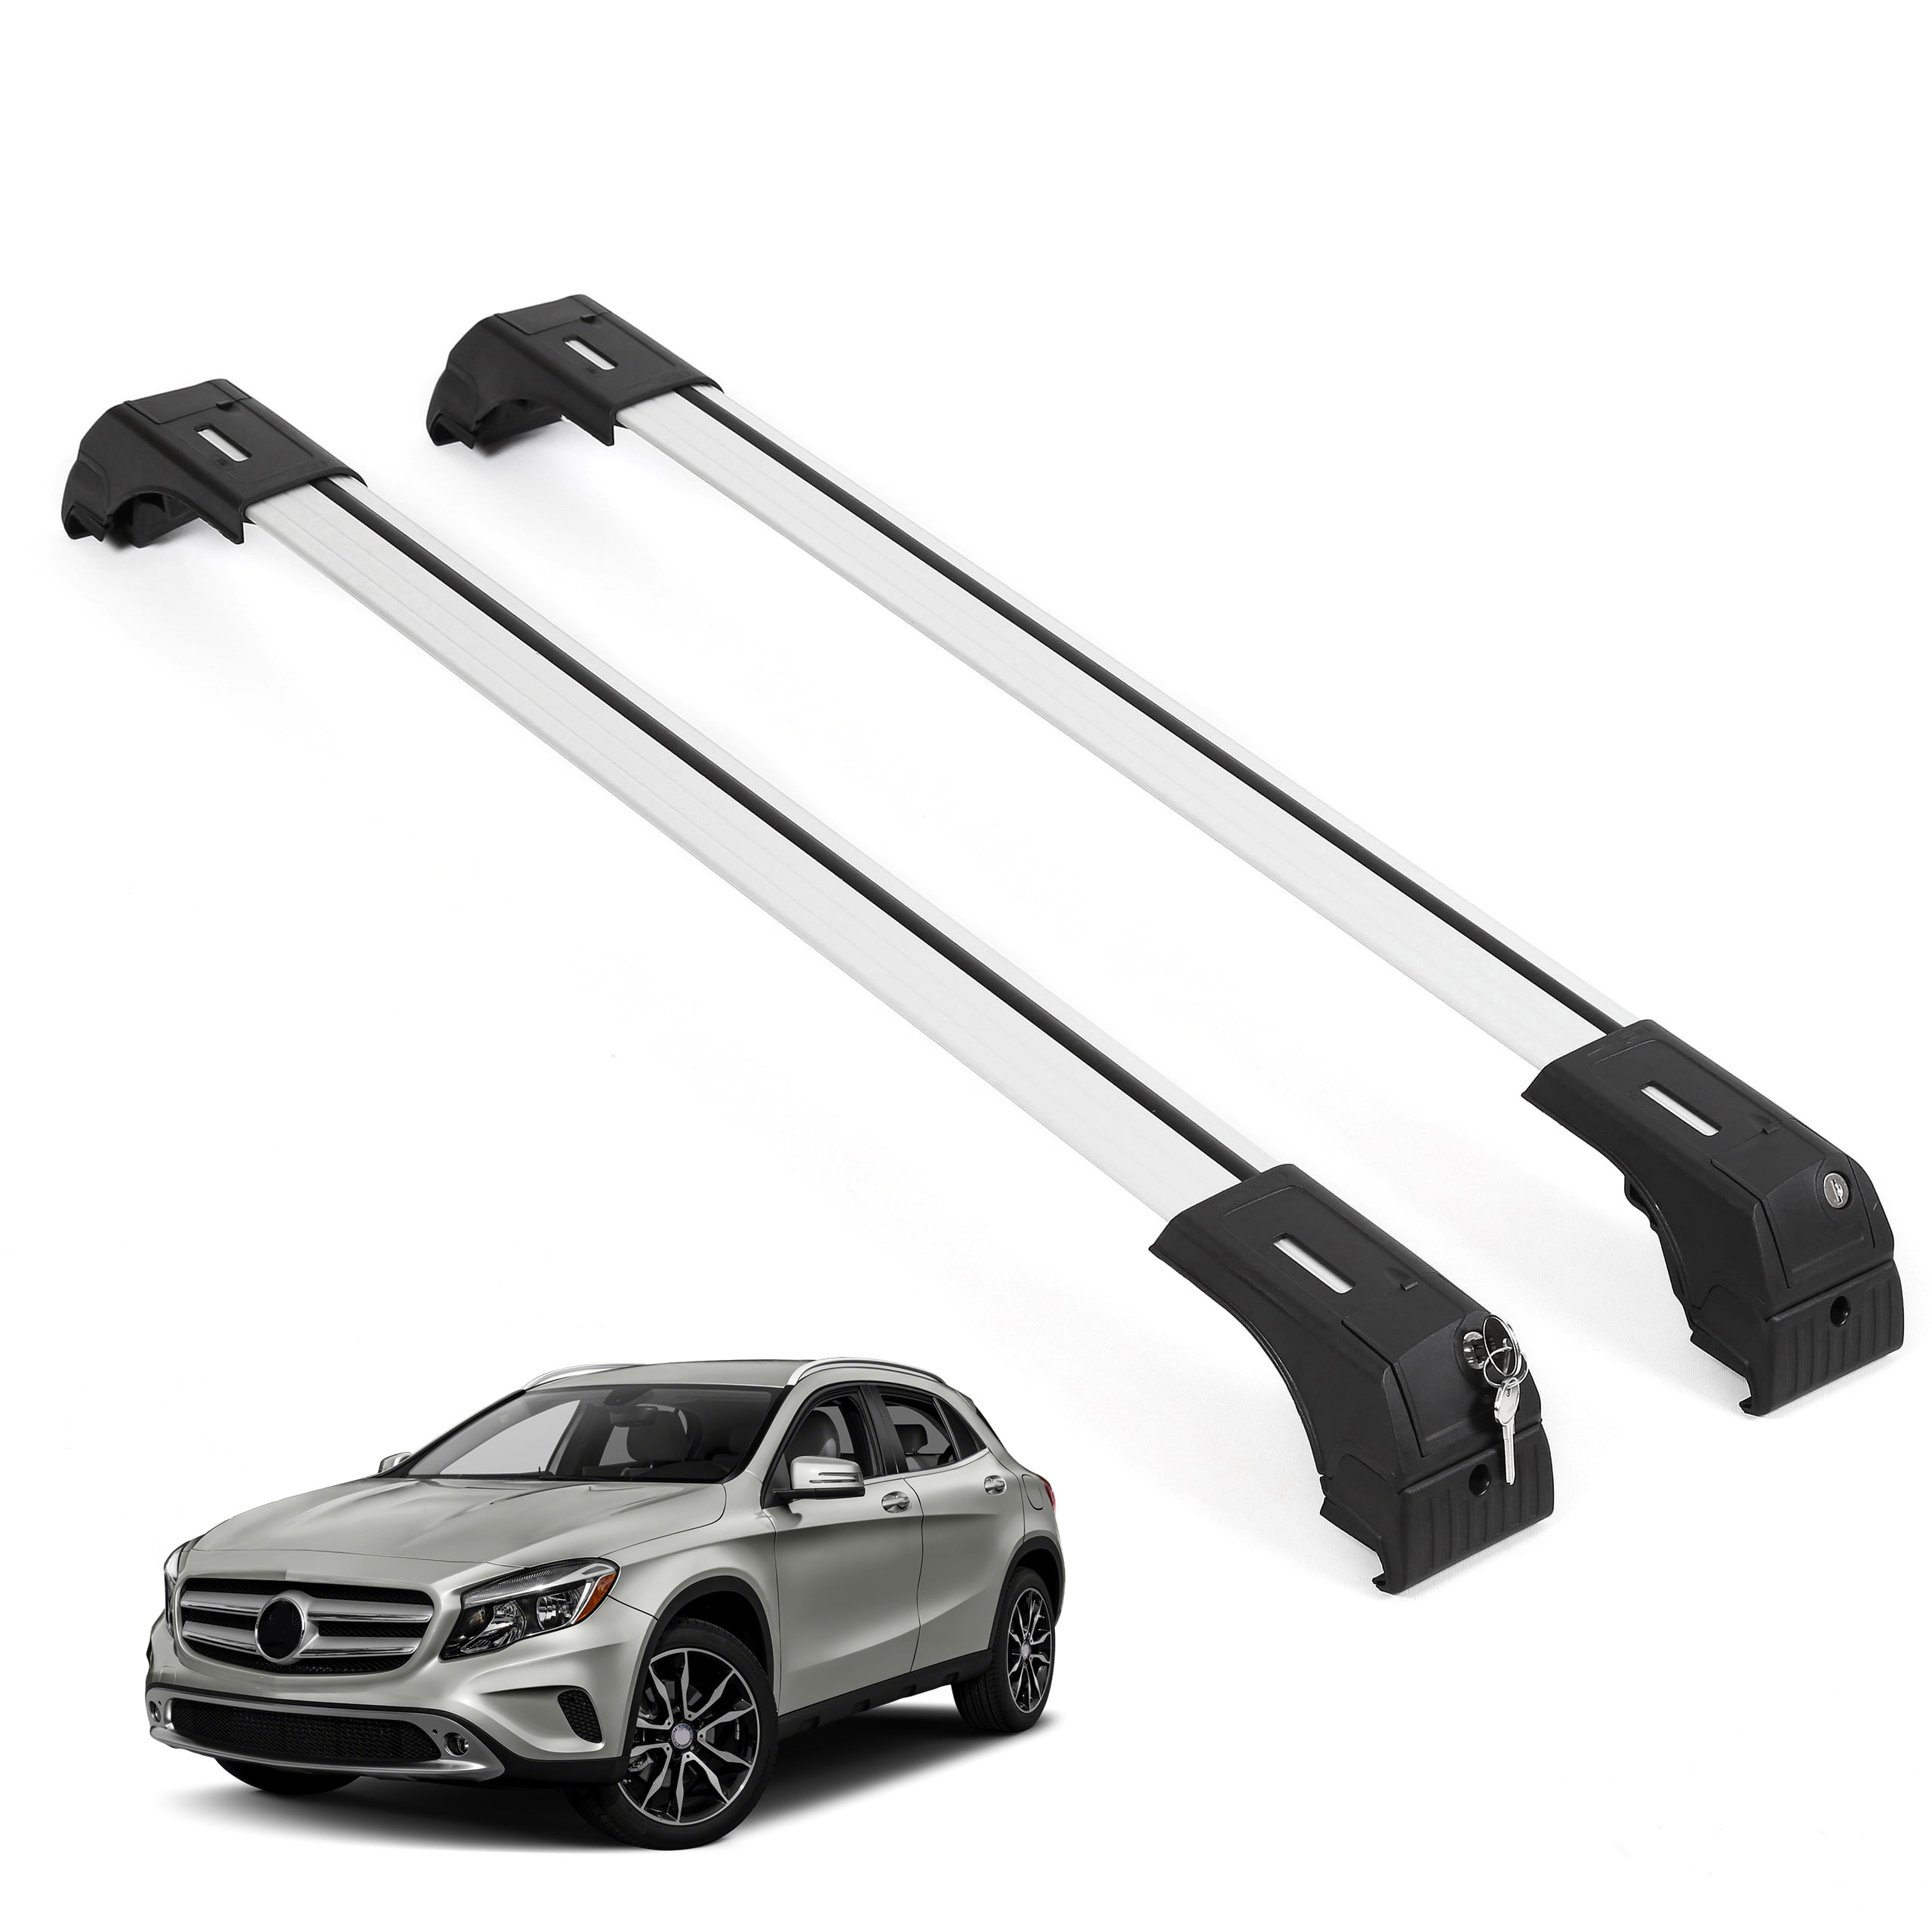 For Mercedes Benz GLA 2014-2019 Roof Rack Cross Bar Pair Luggage Carrier Durable